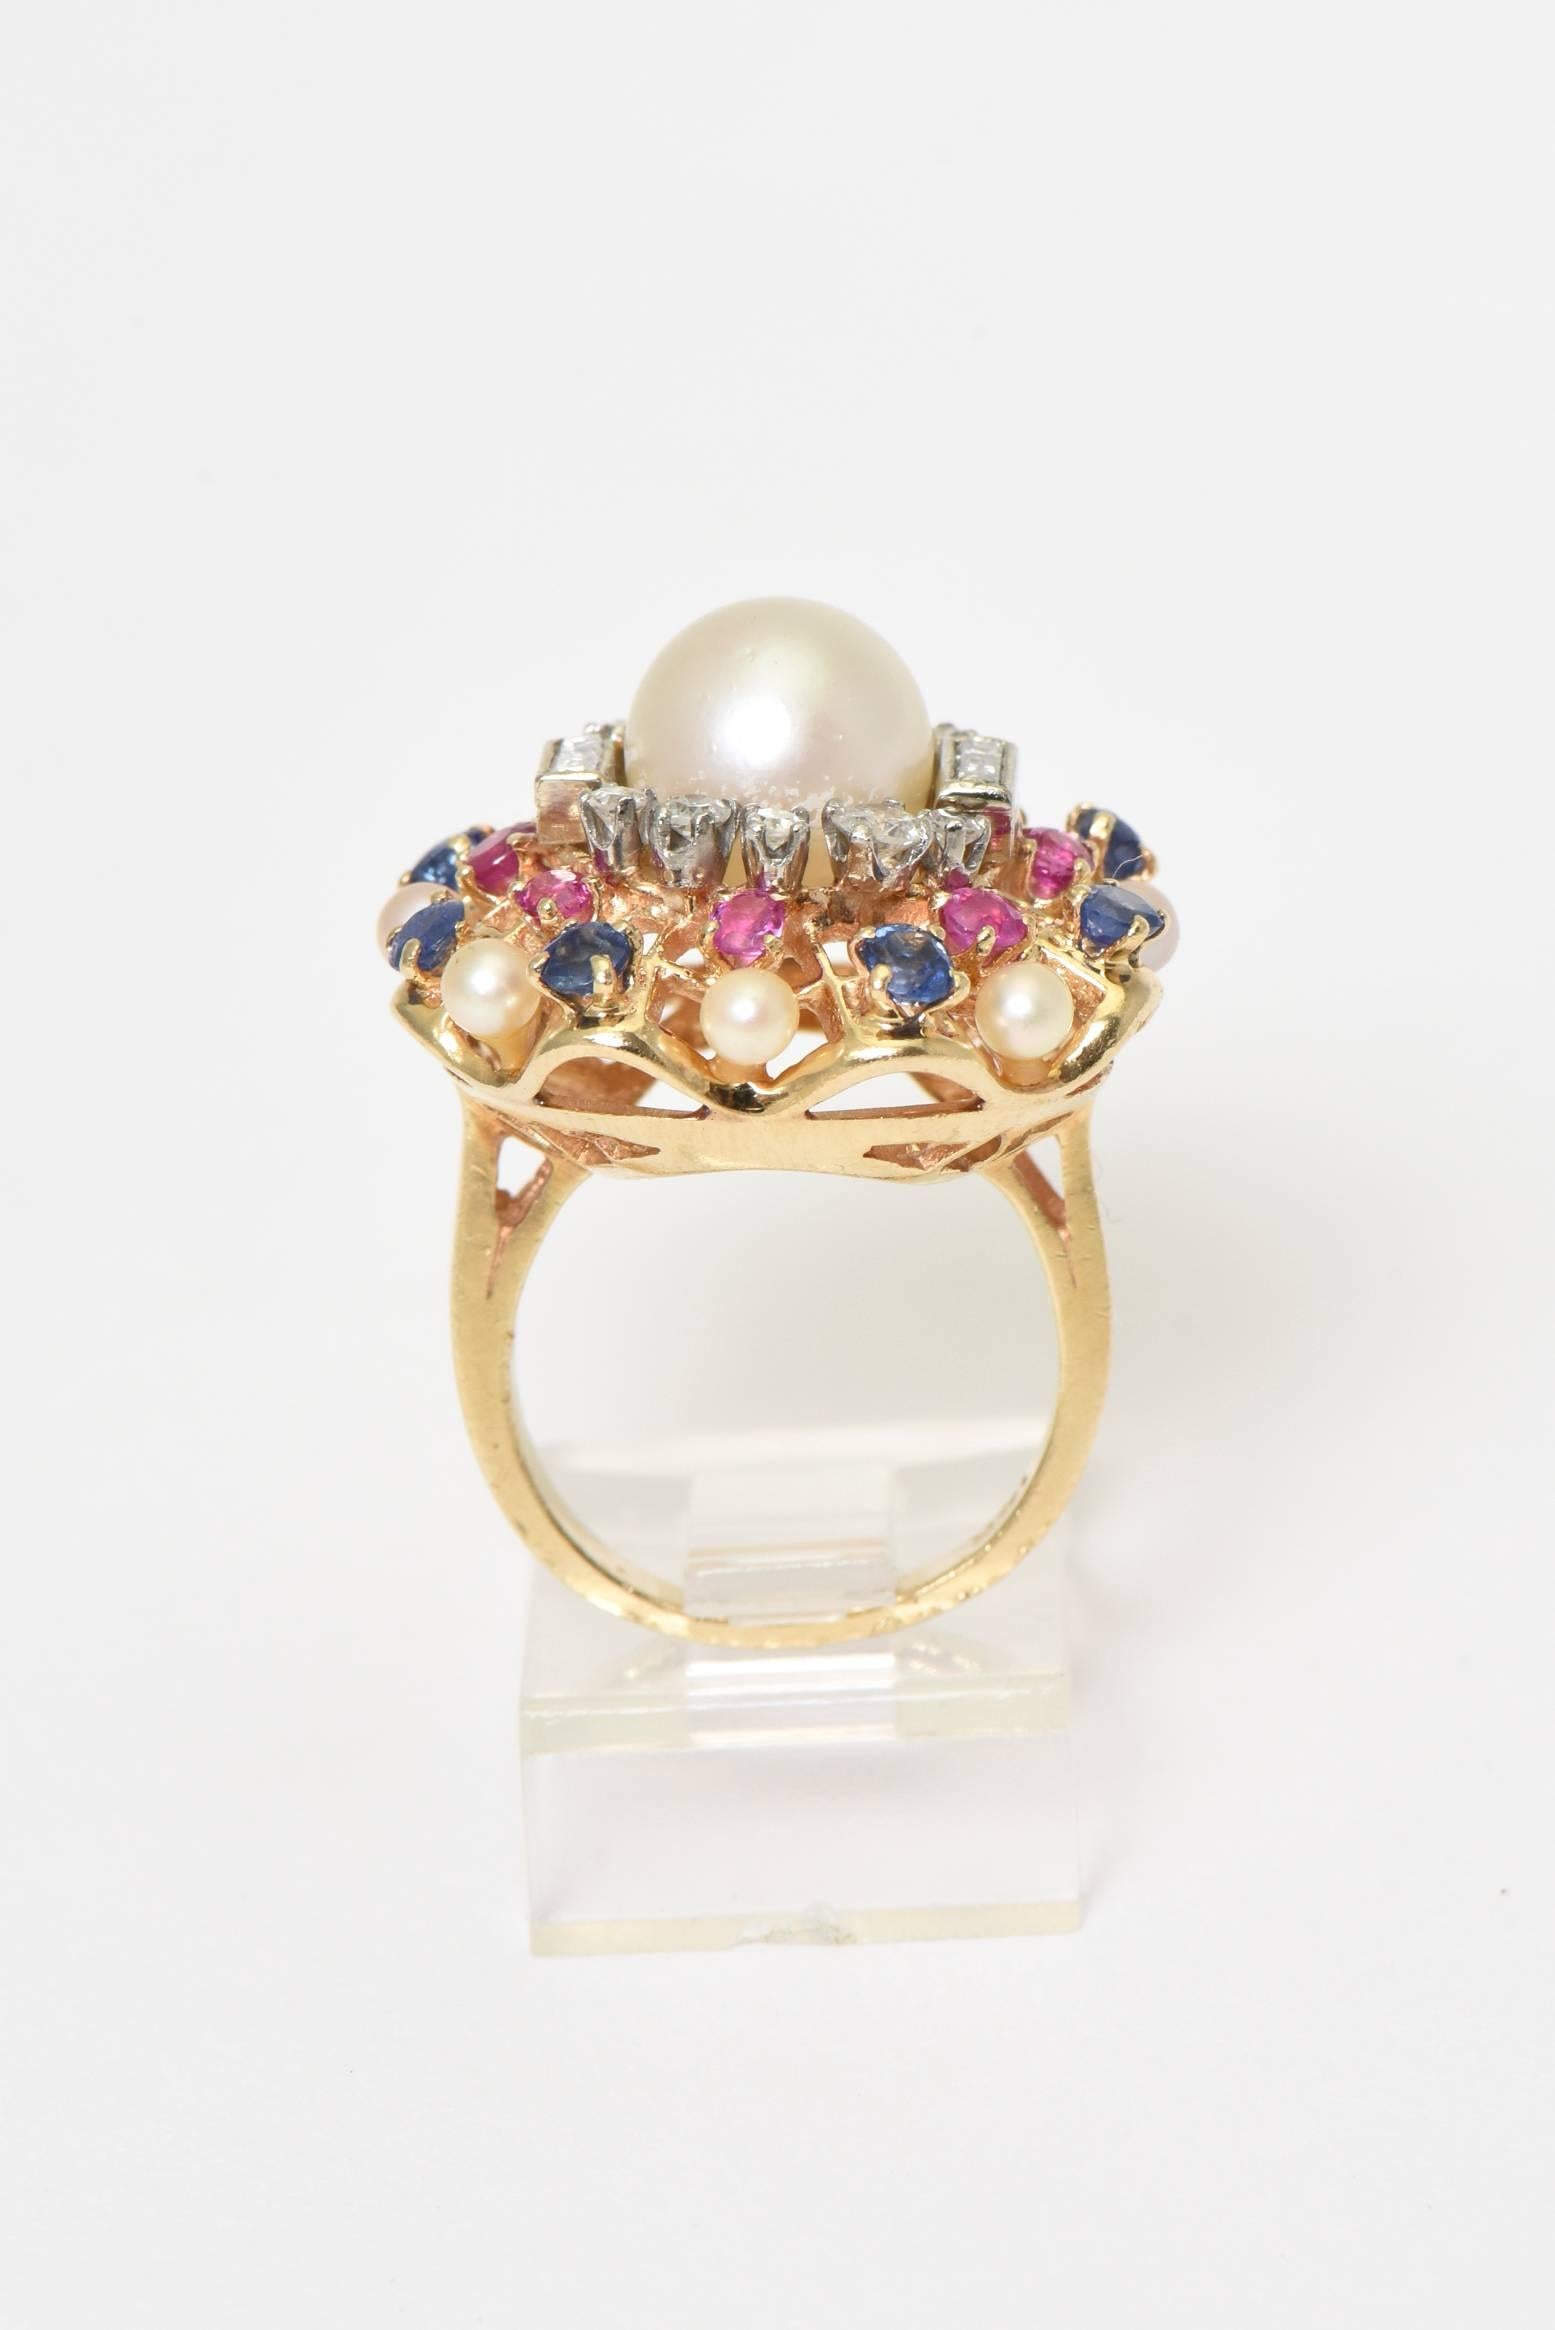 pearl and ruby ring